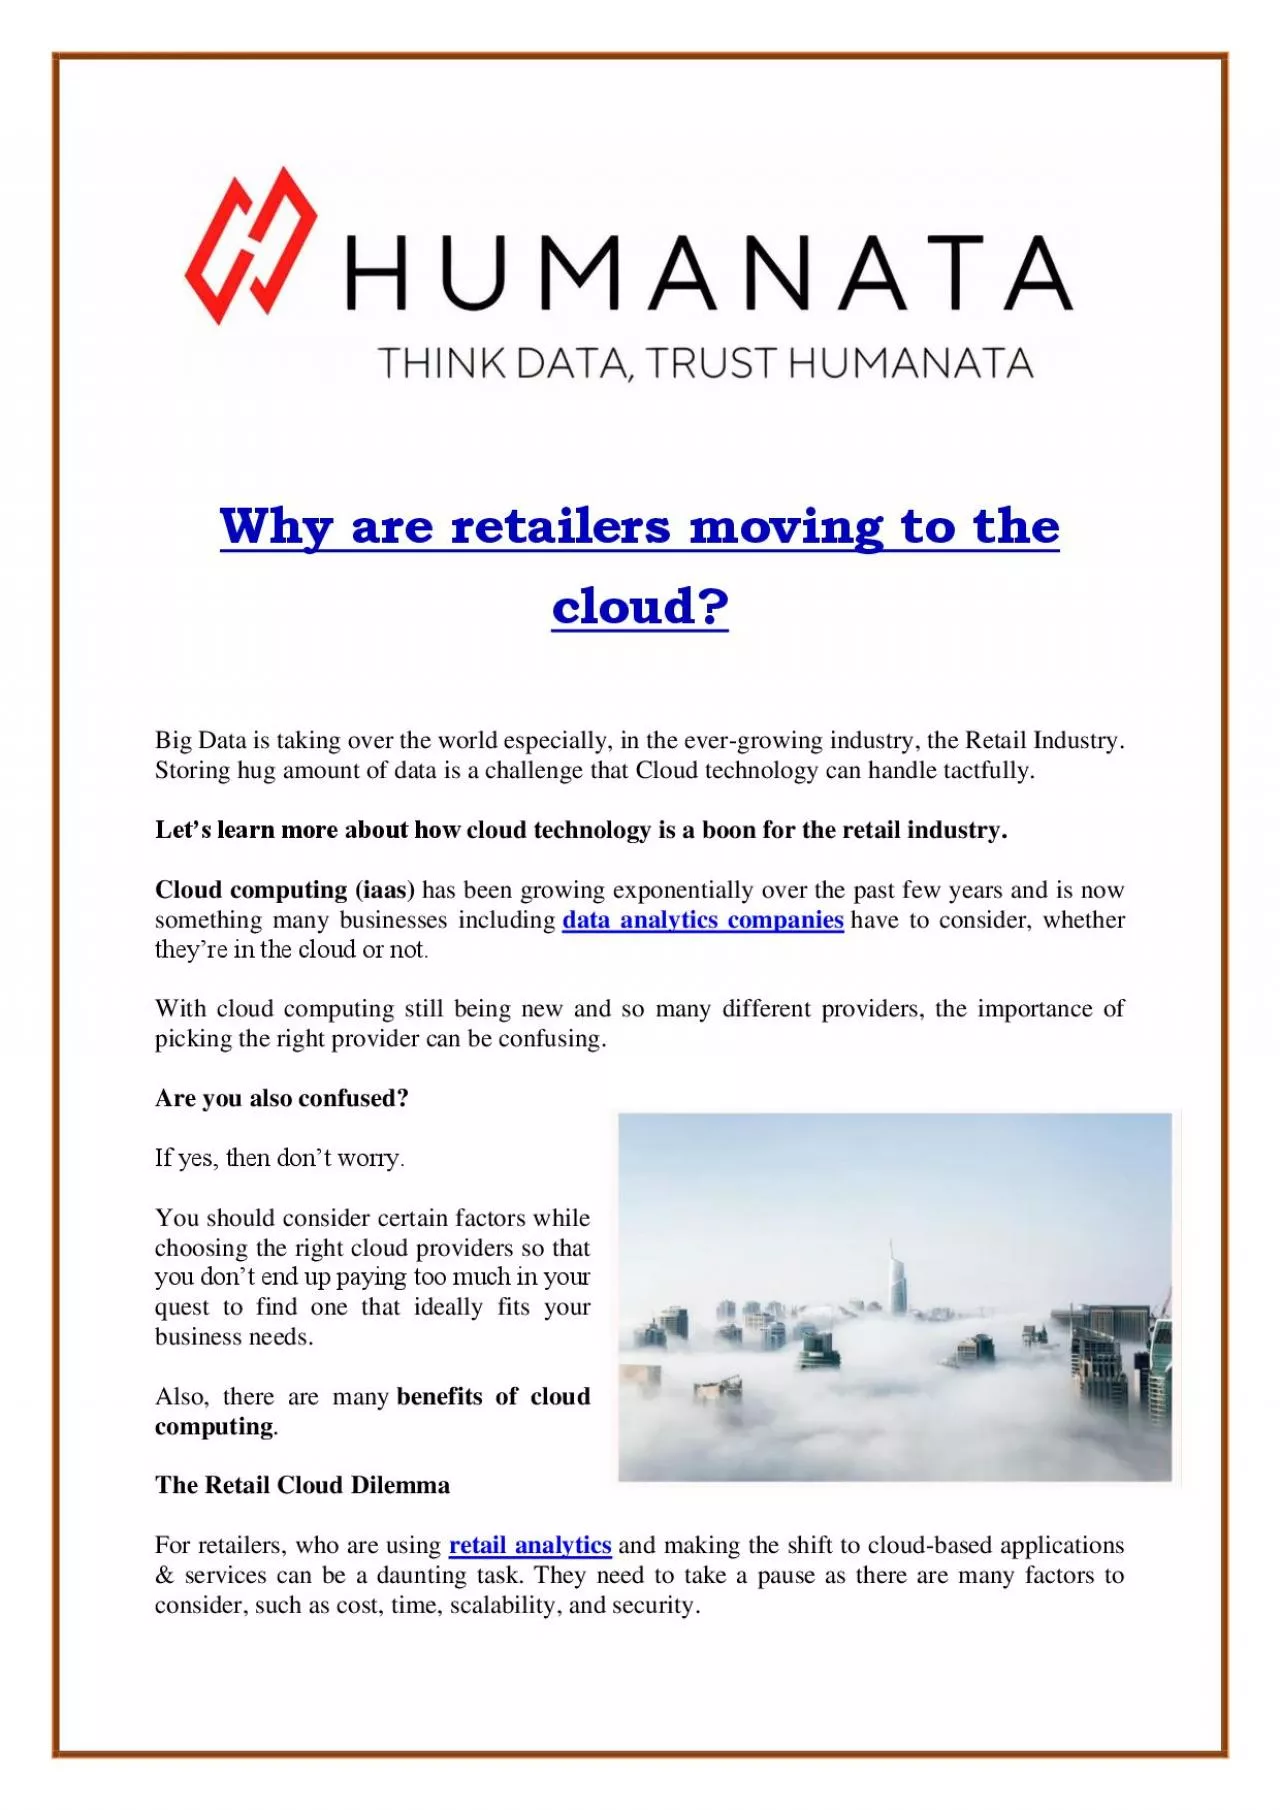 Why are retailers moving to the cloud?